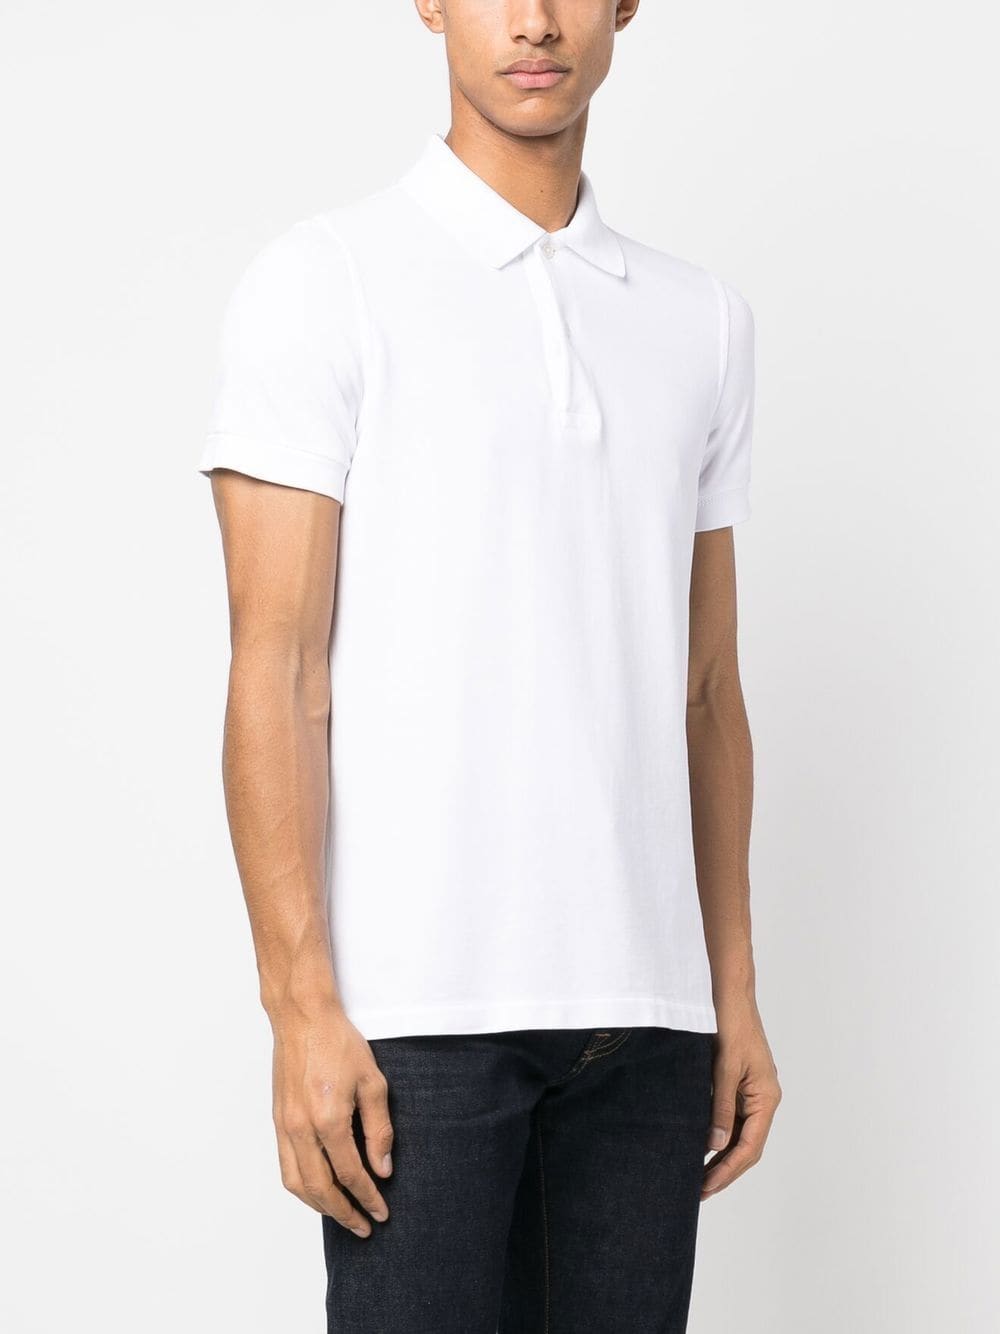 TOM FORD Knitted Polo Shirt White 